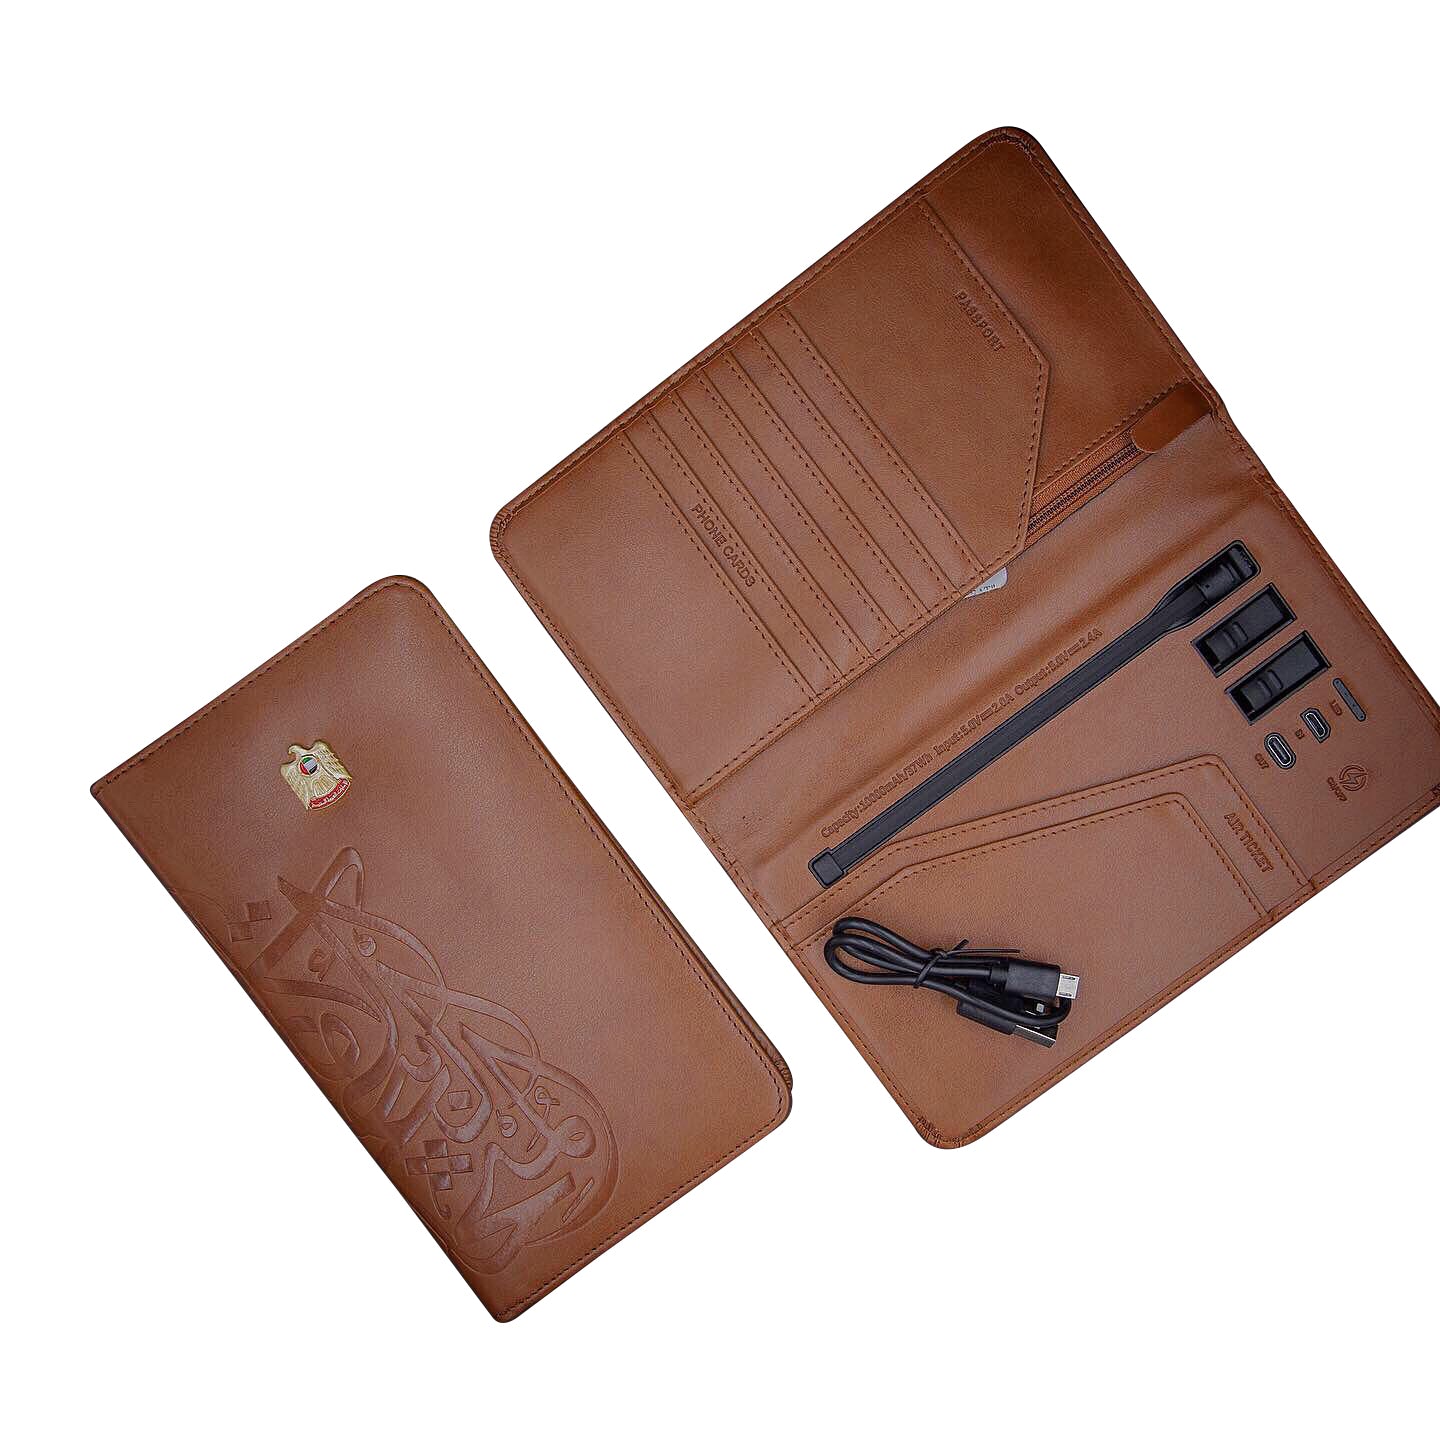 Power Bank Passport Holder UAE | gifts for wife & husband